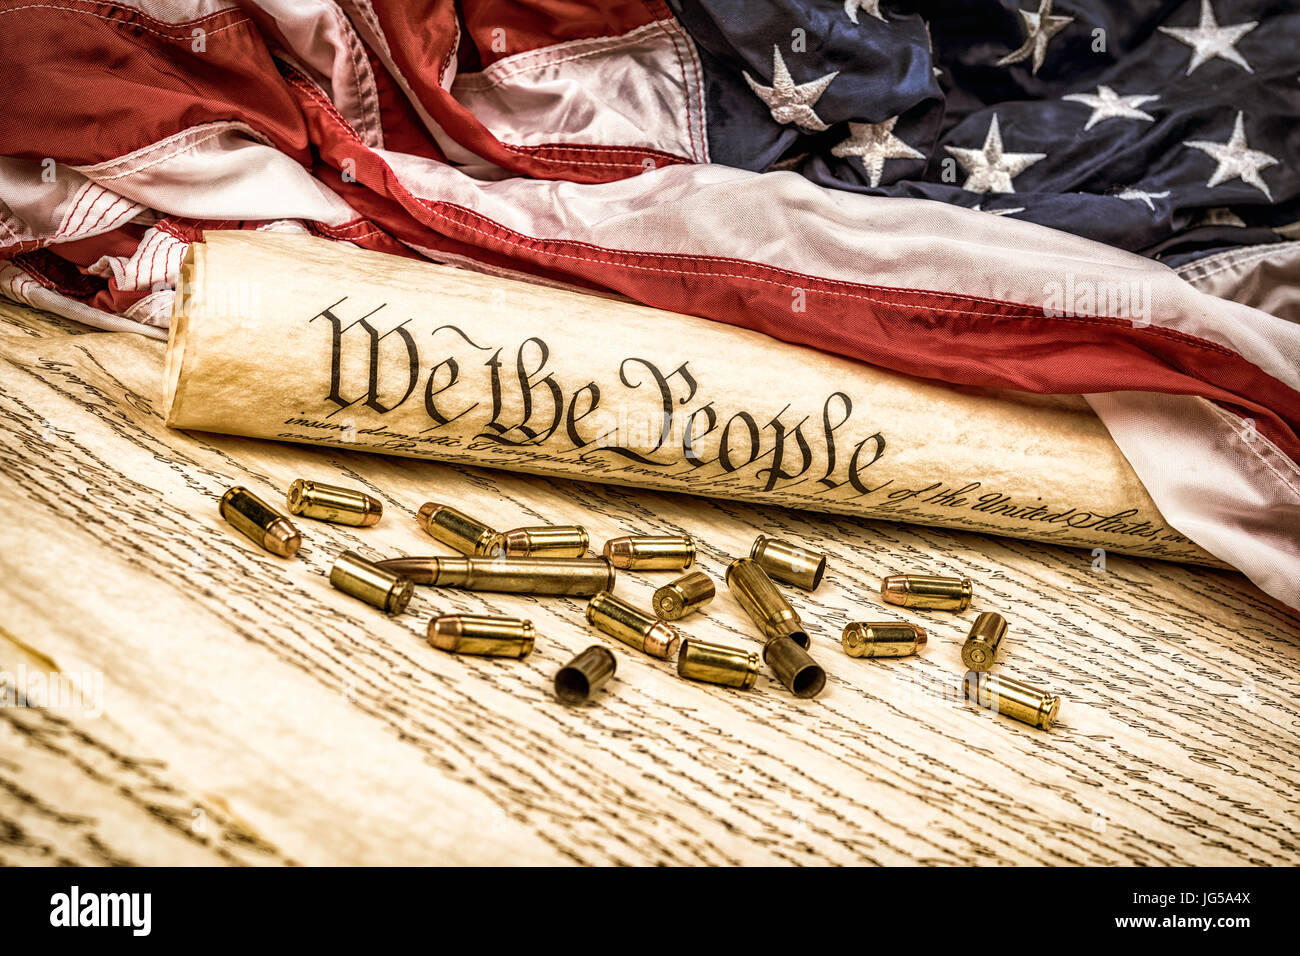 The United States Constitution rolled up on an American flag with bullets scattered about symbolizing the second amendment. Stock Photo